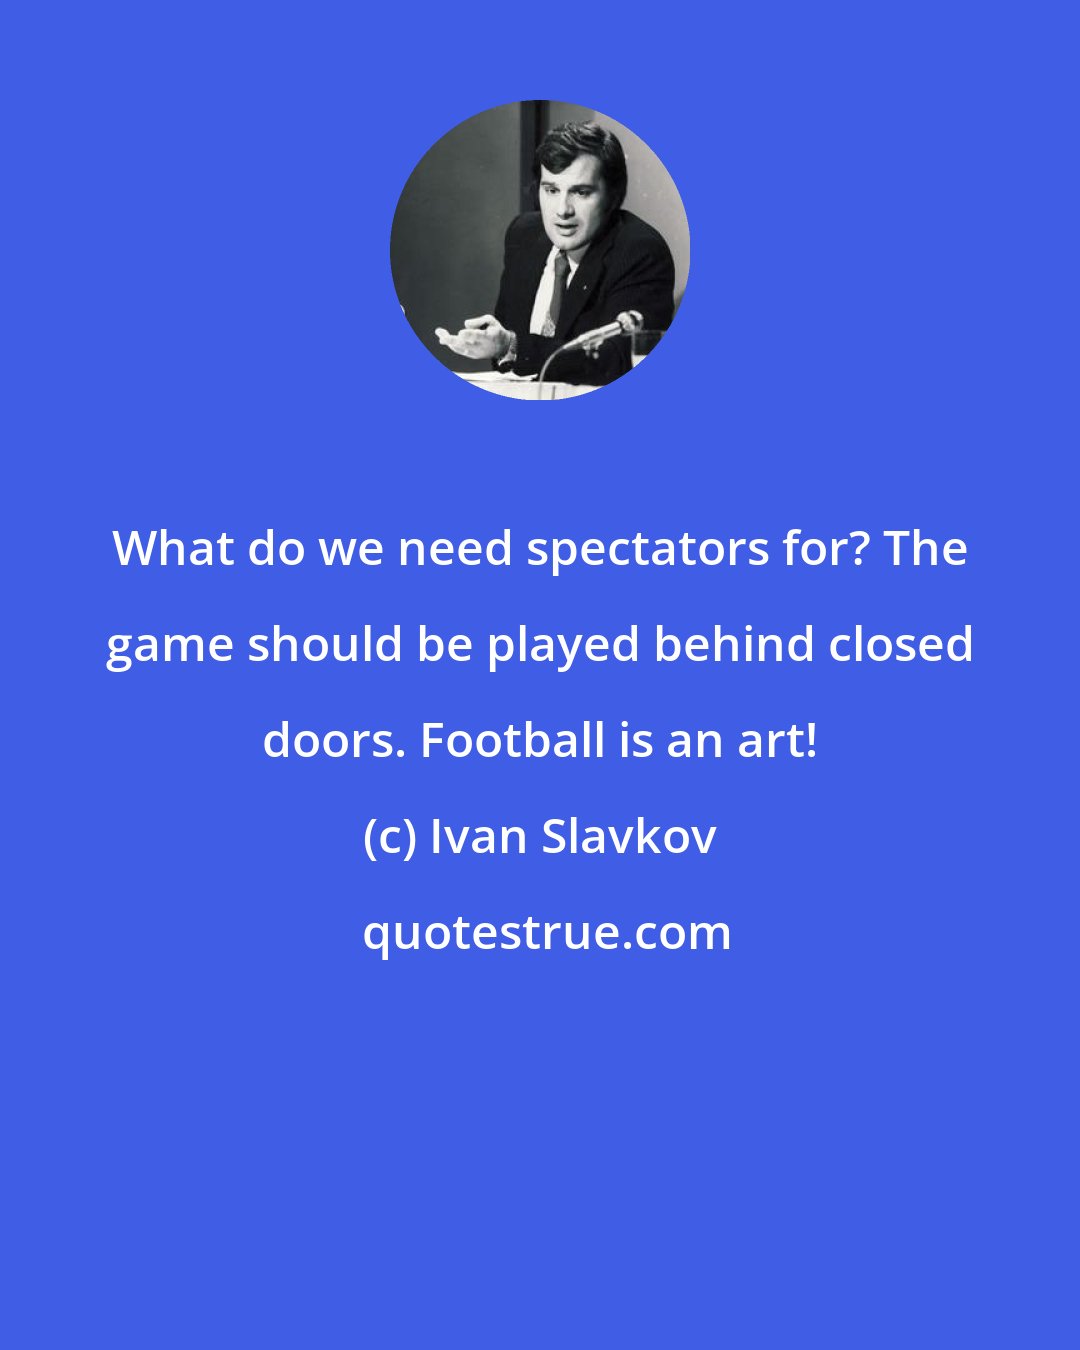 Ivan Slavkov: What do we need spectators for? The game should be played behind closed doors. Football is an art!